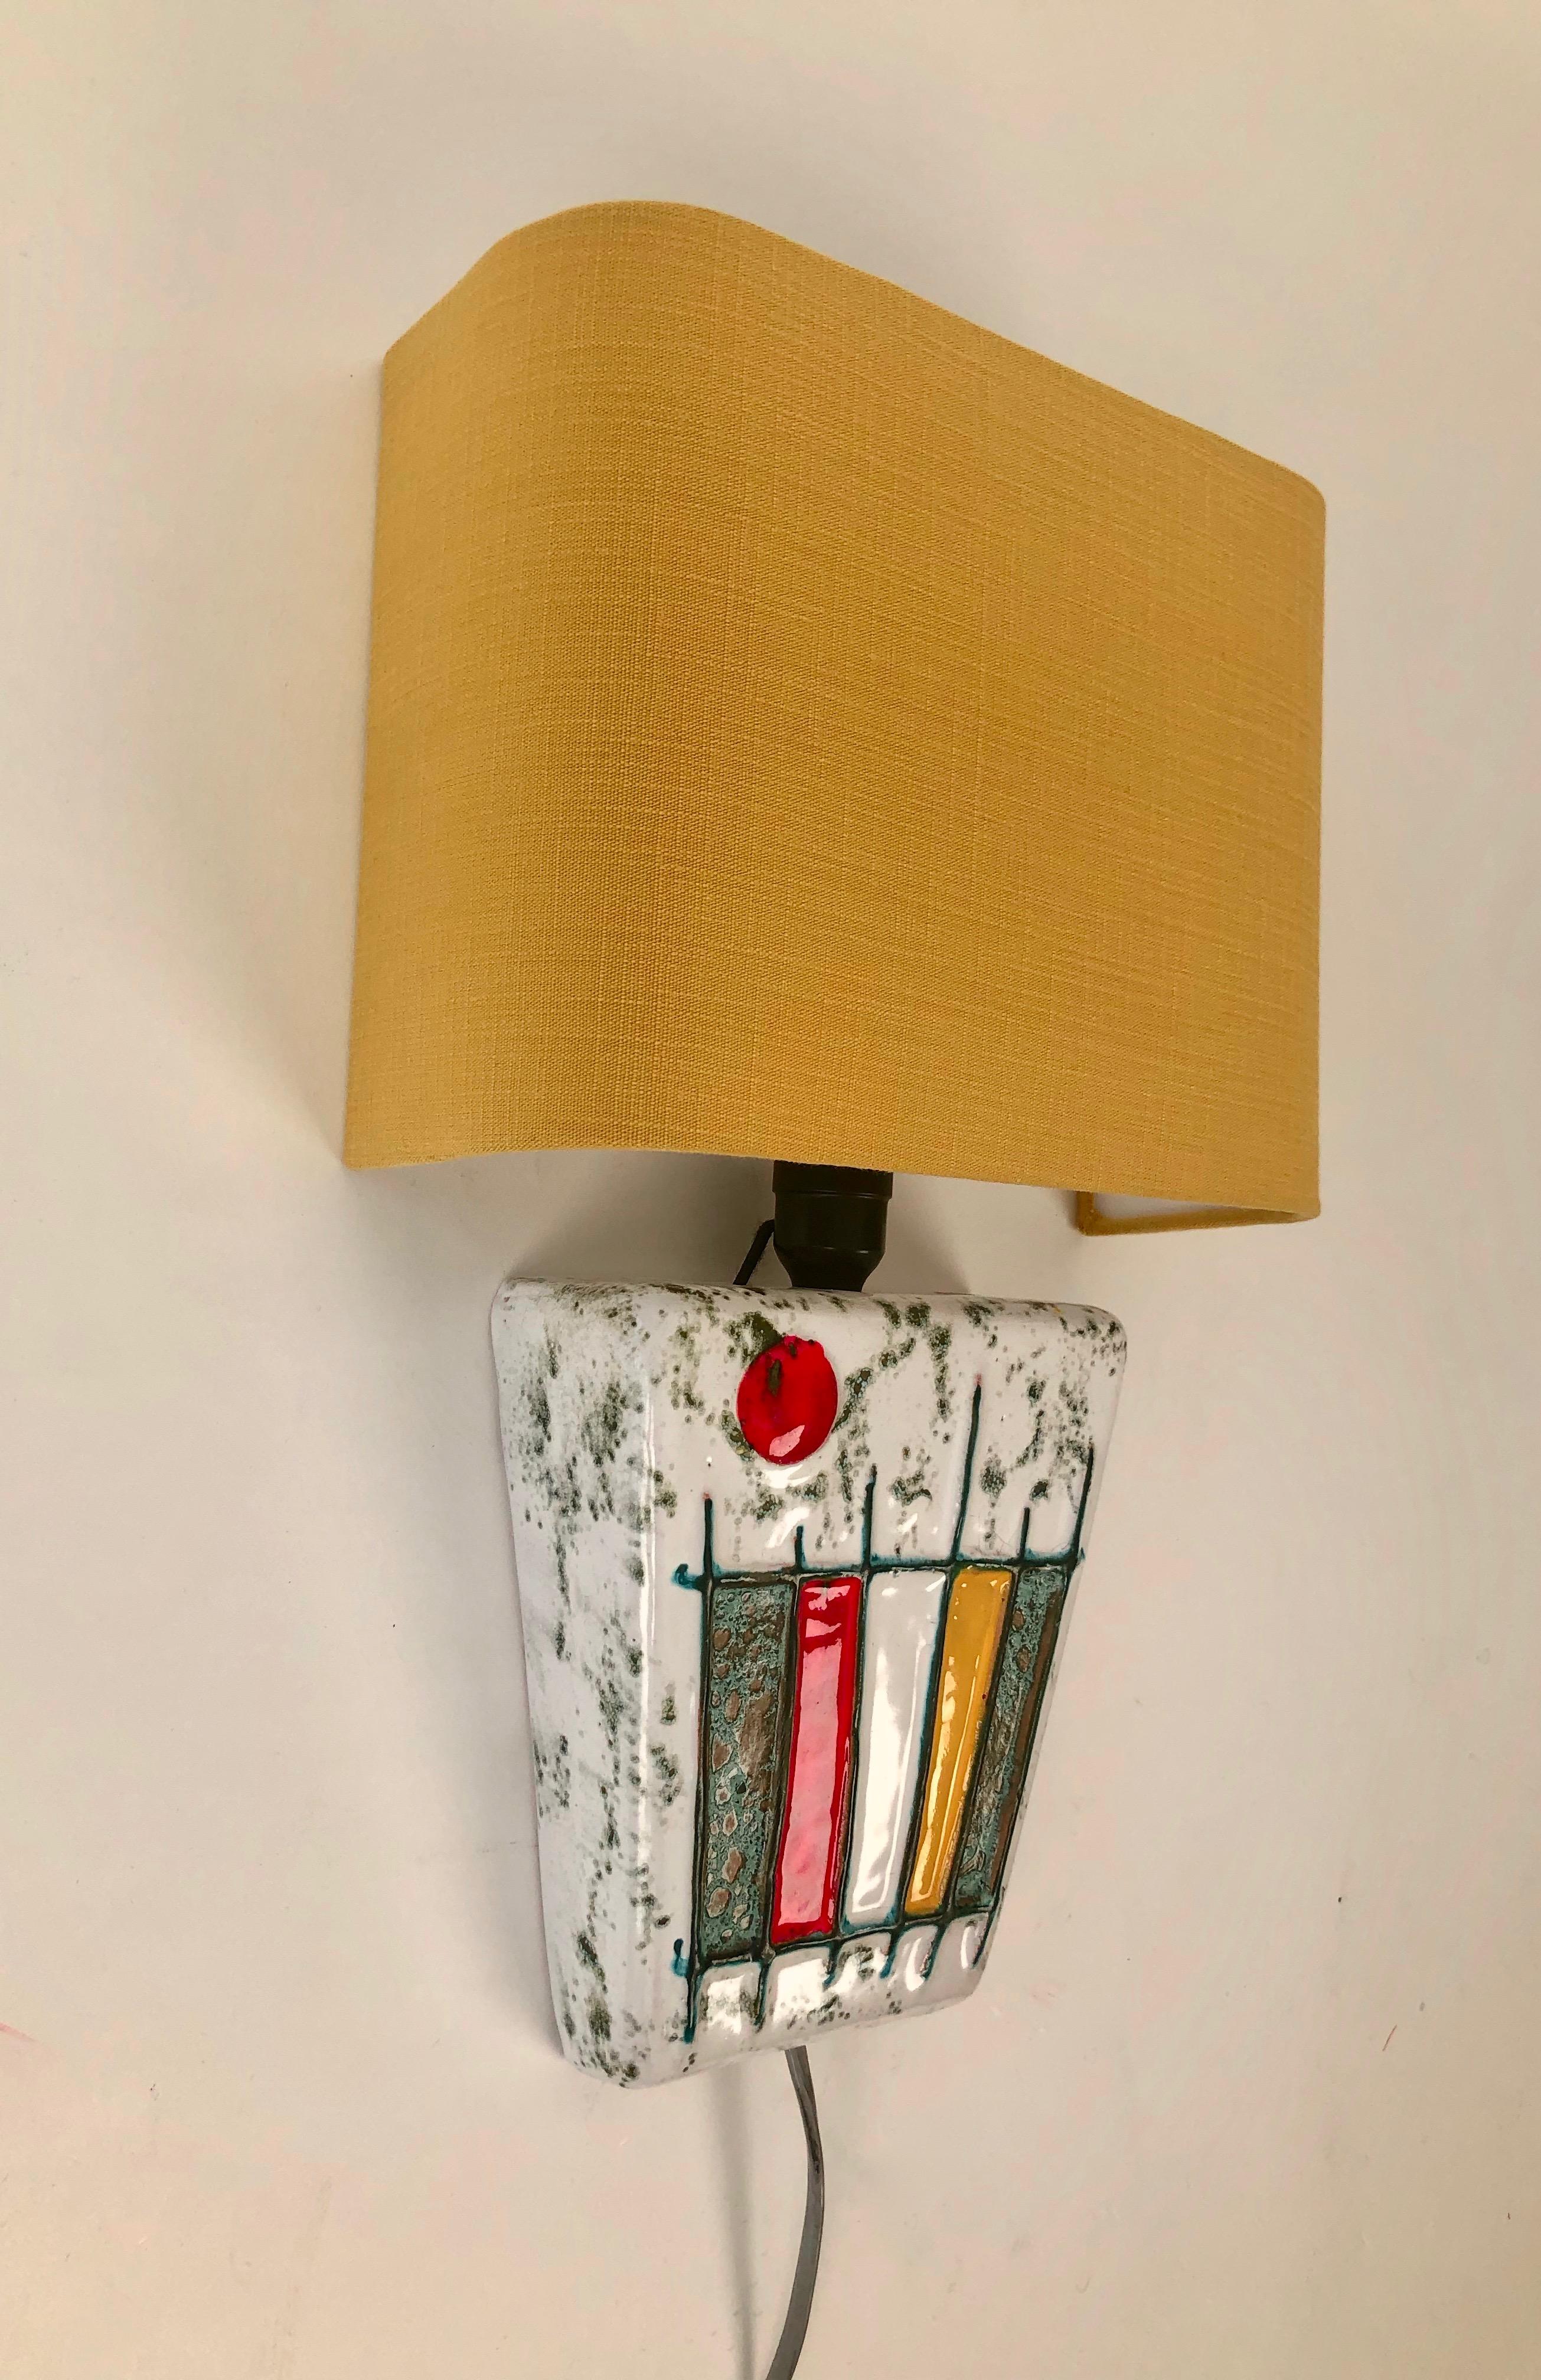 This Modernist ceramic wall light was made during the Studio Ceramics Movement in Hungary, in the 1950's.
The hand formed ceramic element is glazed and the decoration reflects what was happening in painting
at that time.

The new shade is based